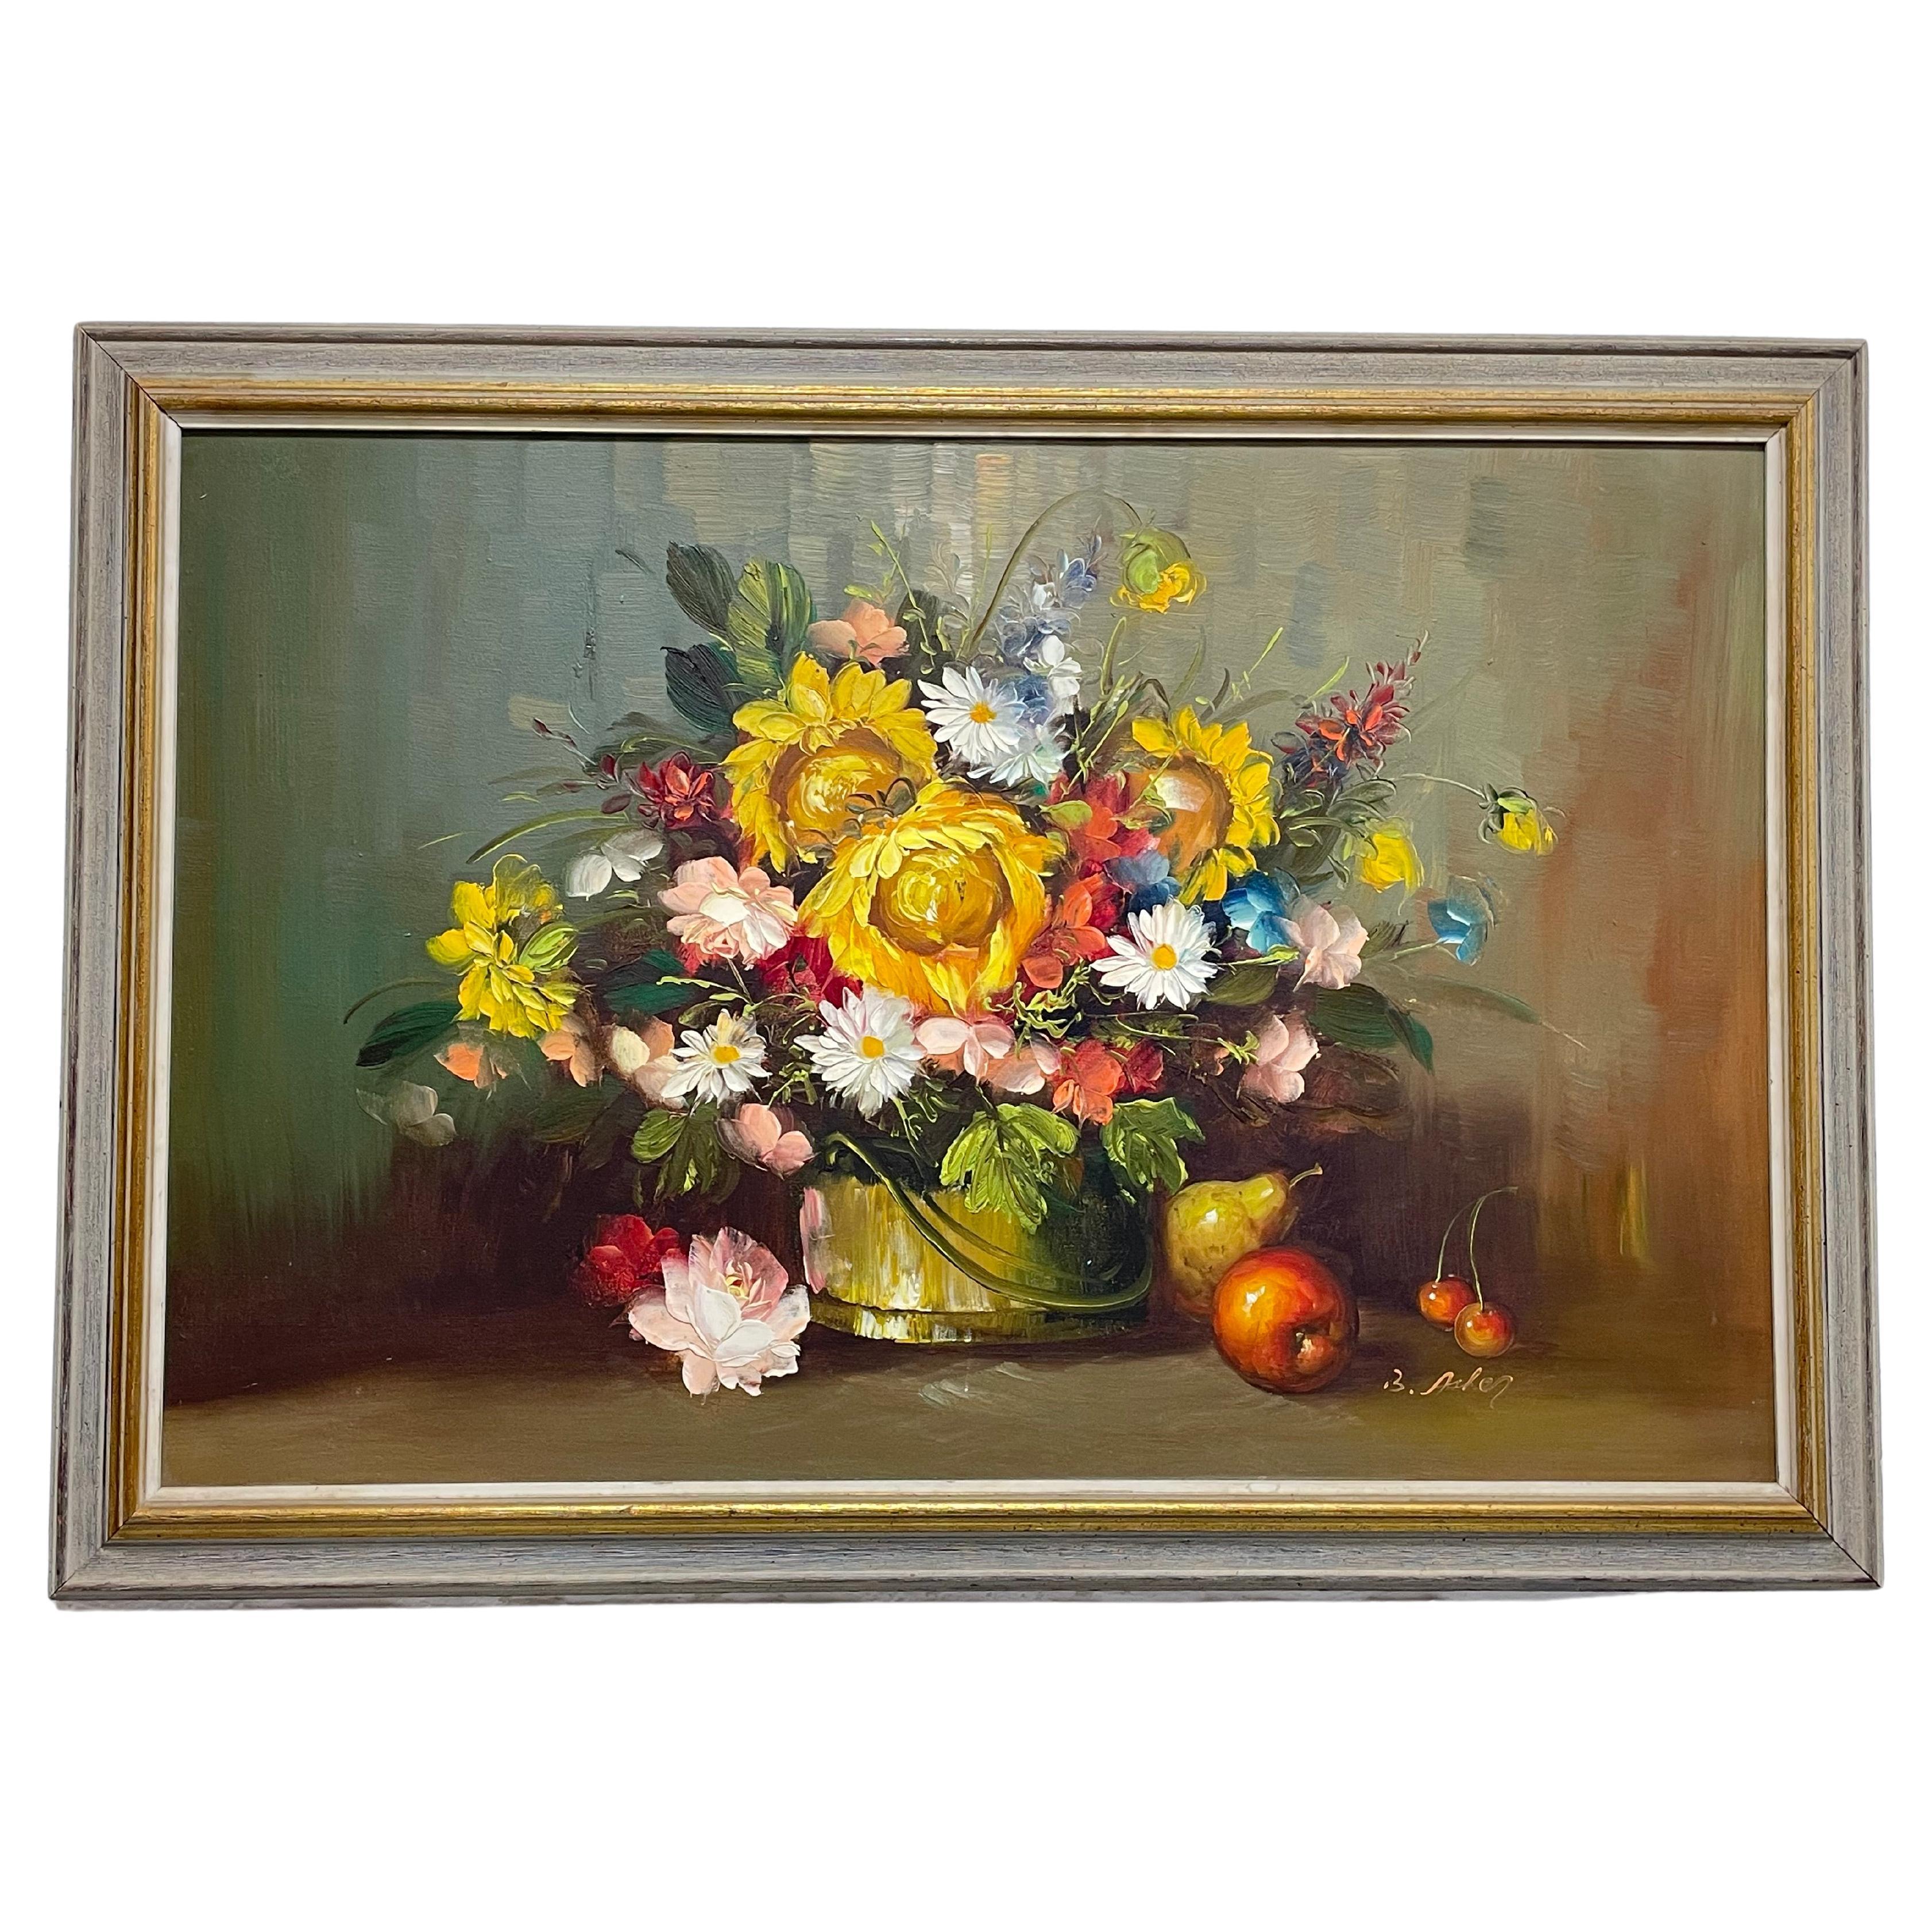 Original oil painting signed B. Asher of bright flowers. Framed in wood frame. Hanging wire along back. 